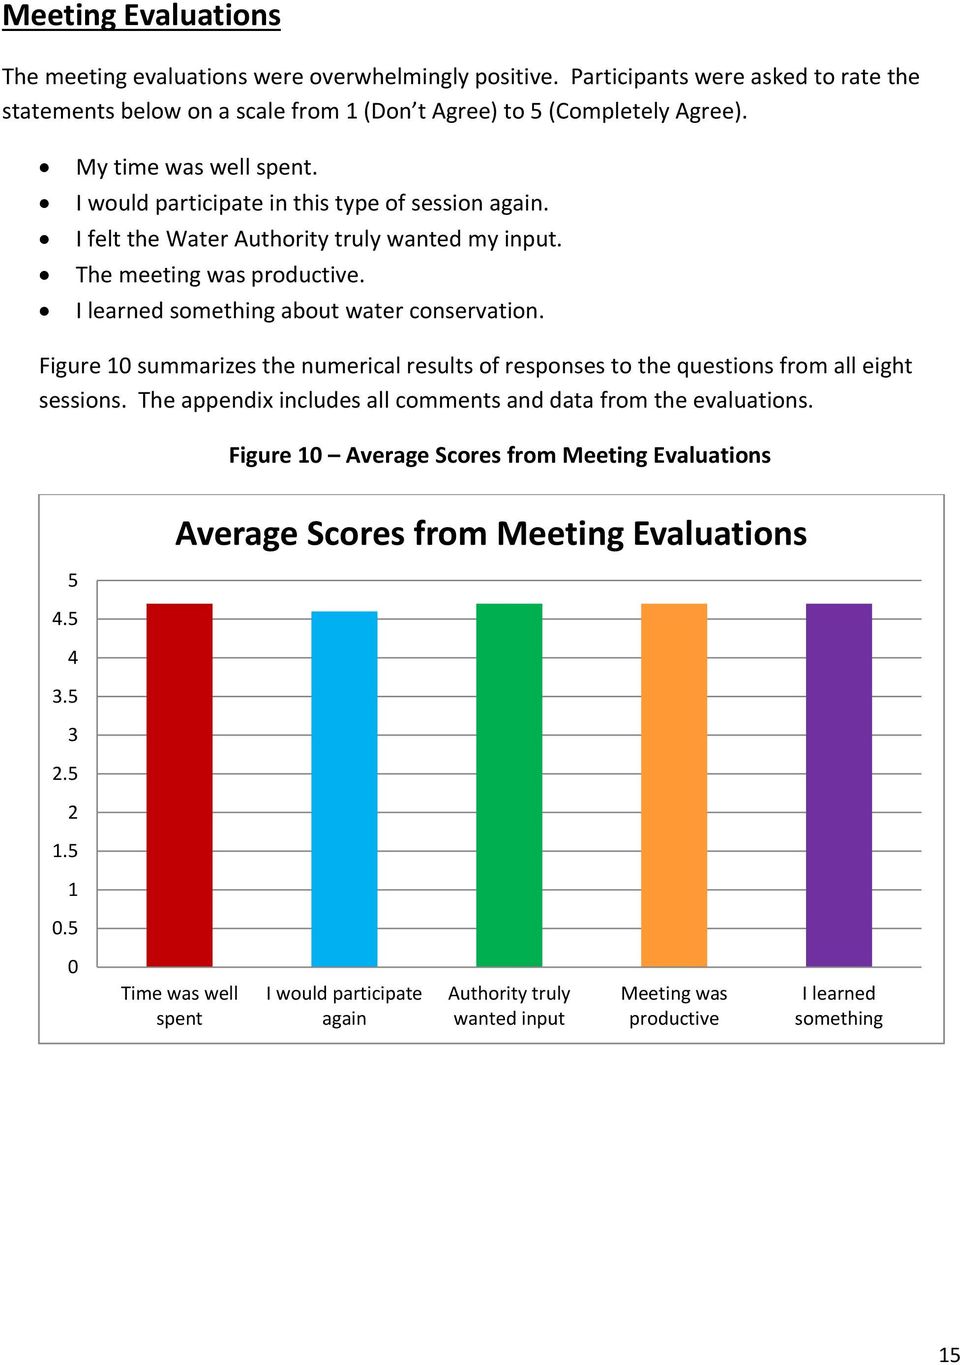 Figure 10 summarizes the numerical results of responses to the questions from all eight sessions. The appendix includes all comments and data from the evaluations.